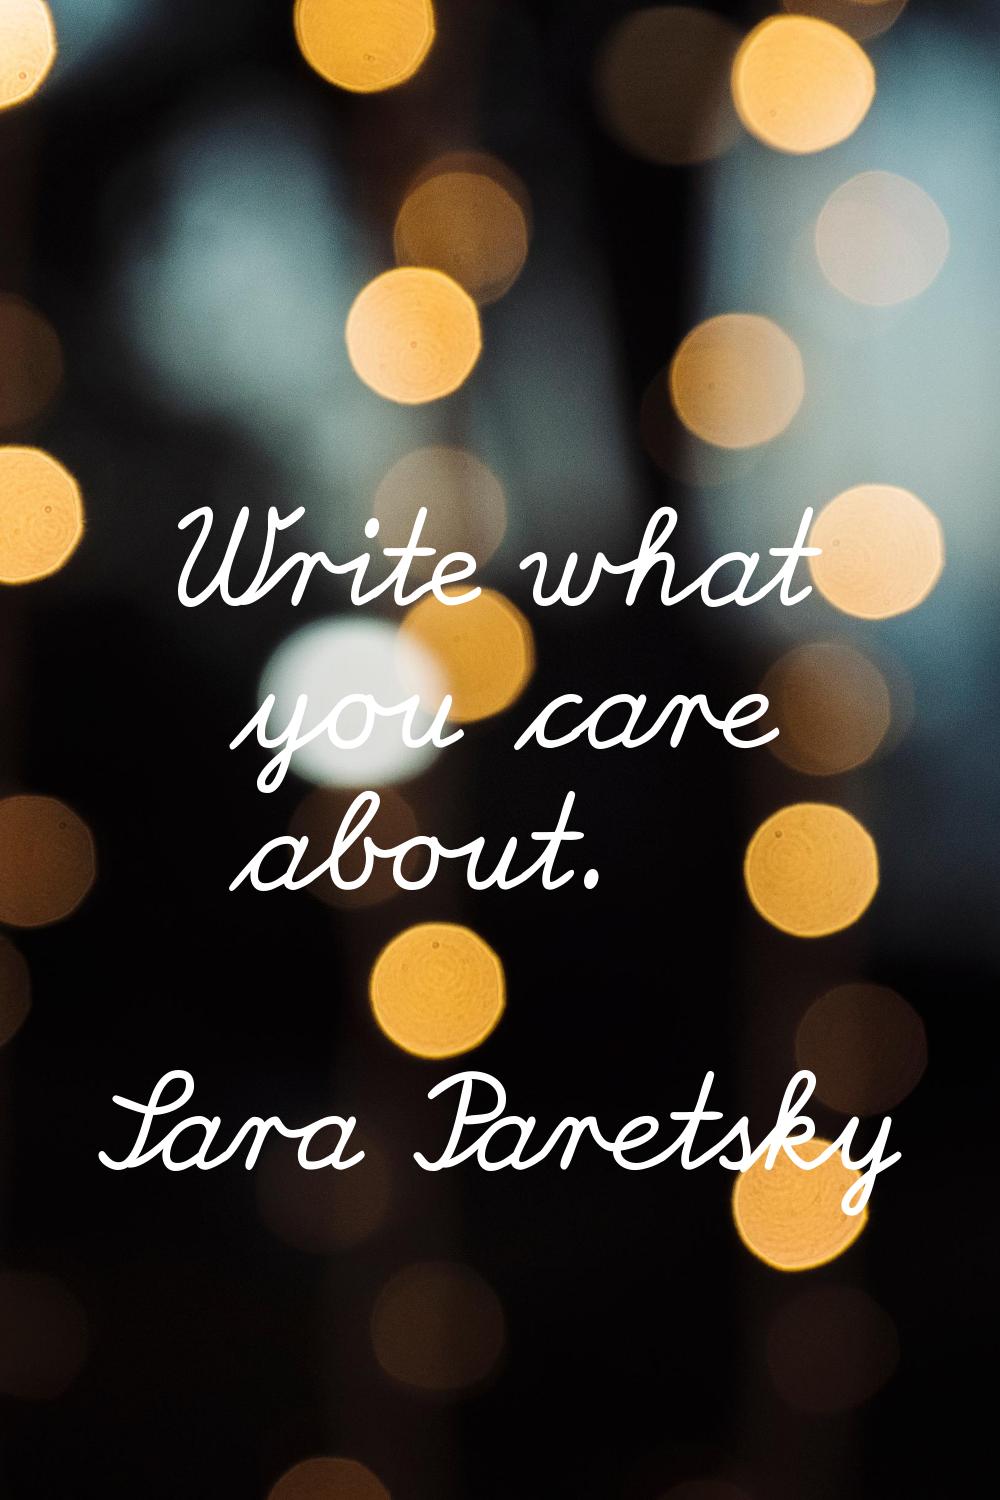 Write what you care about.